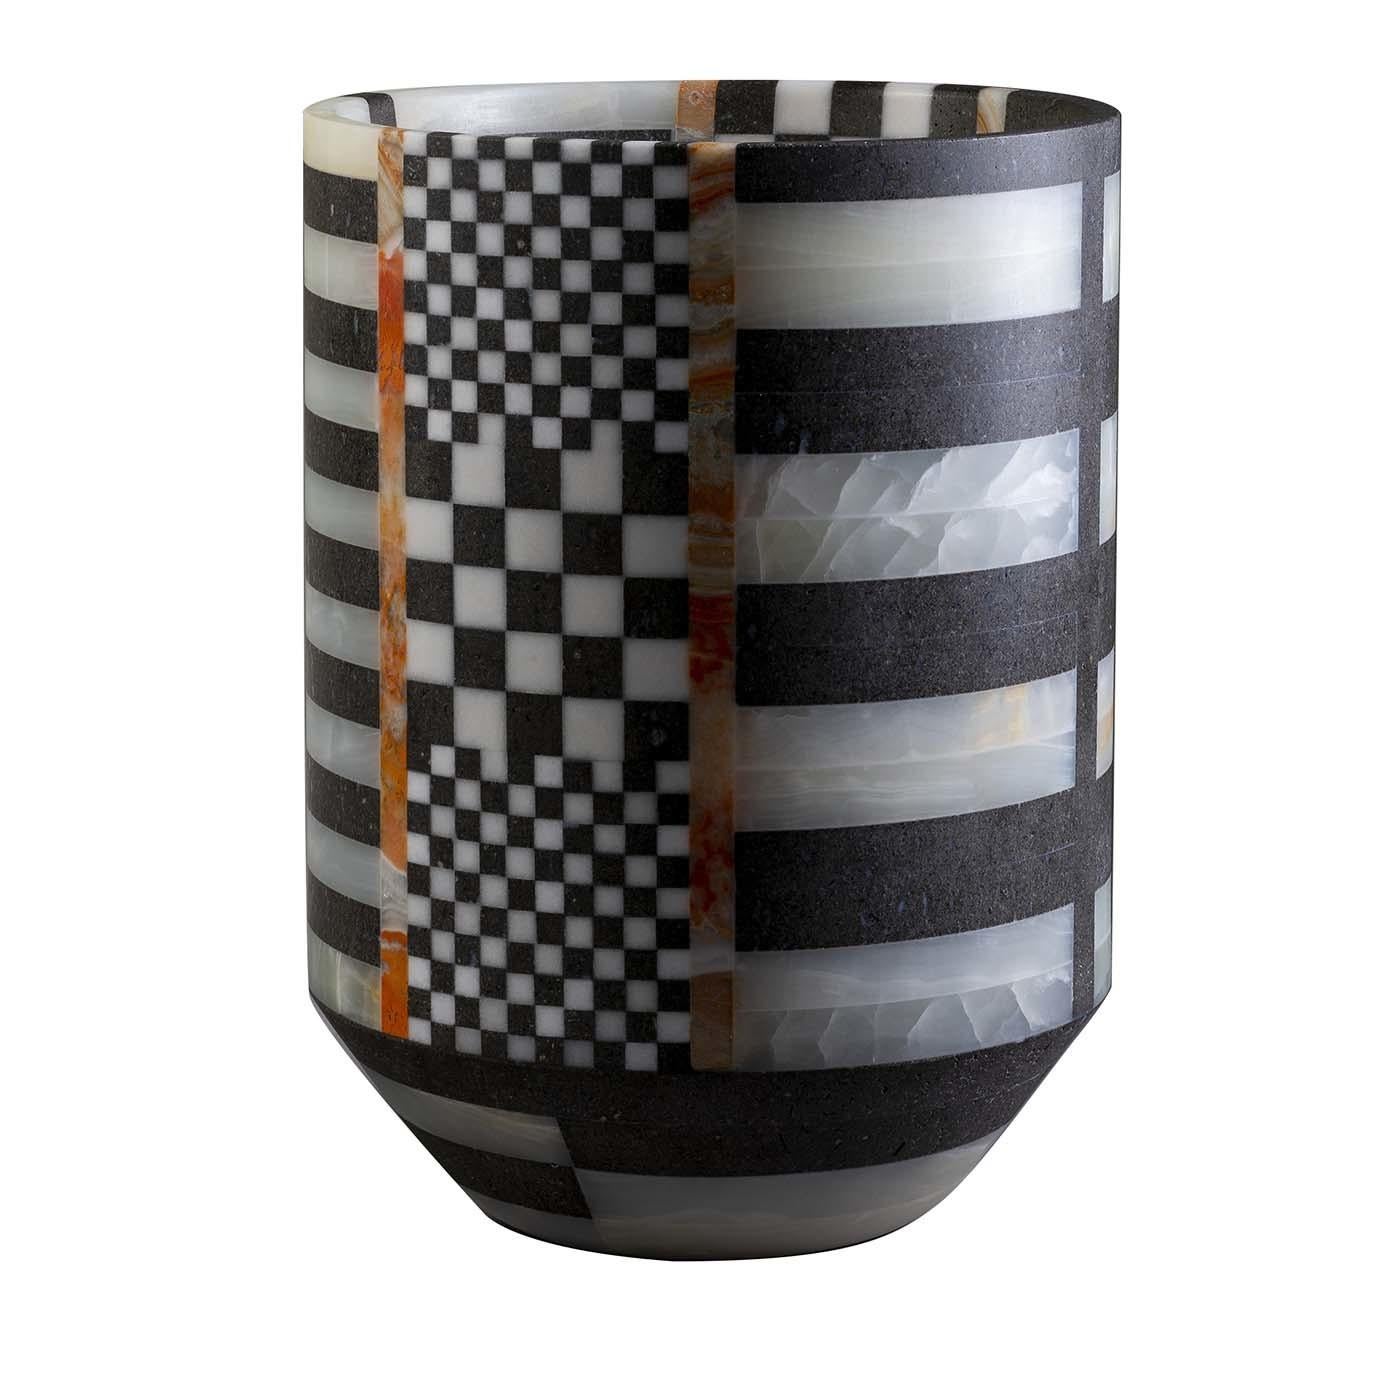 The checkerboard and striped effect showcased by this superb vase requires complex technical skills to compose the geometric shapes on a curved surface. Carefully cut pieces of basalt, green onyx, rainbow onyx, and white Sivec marble are selected,